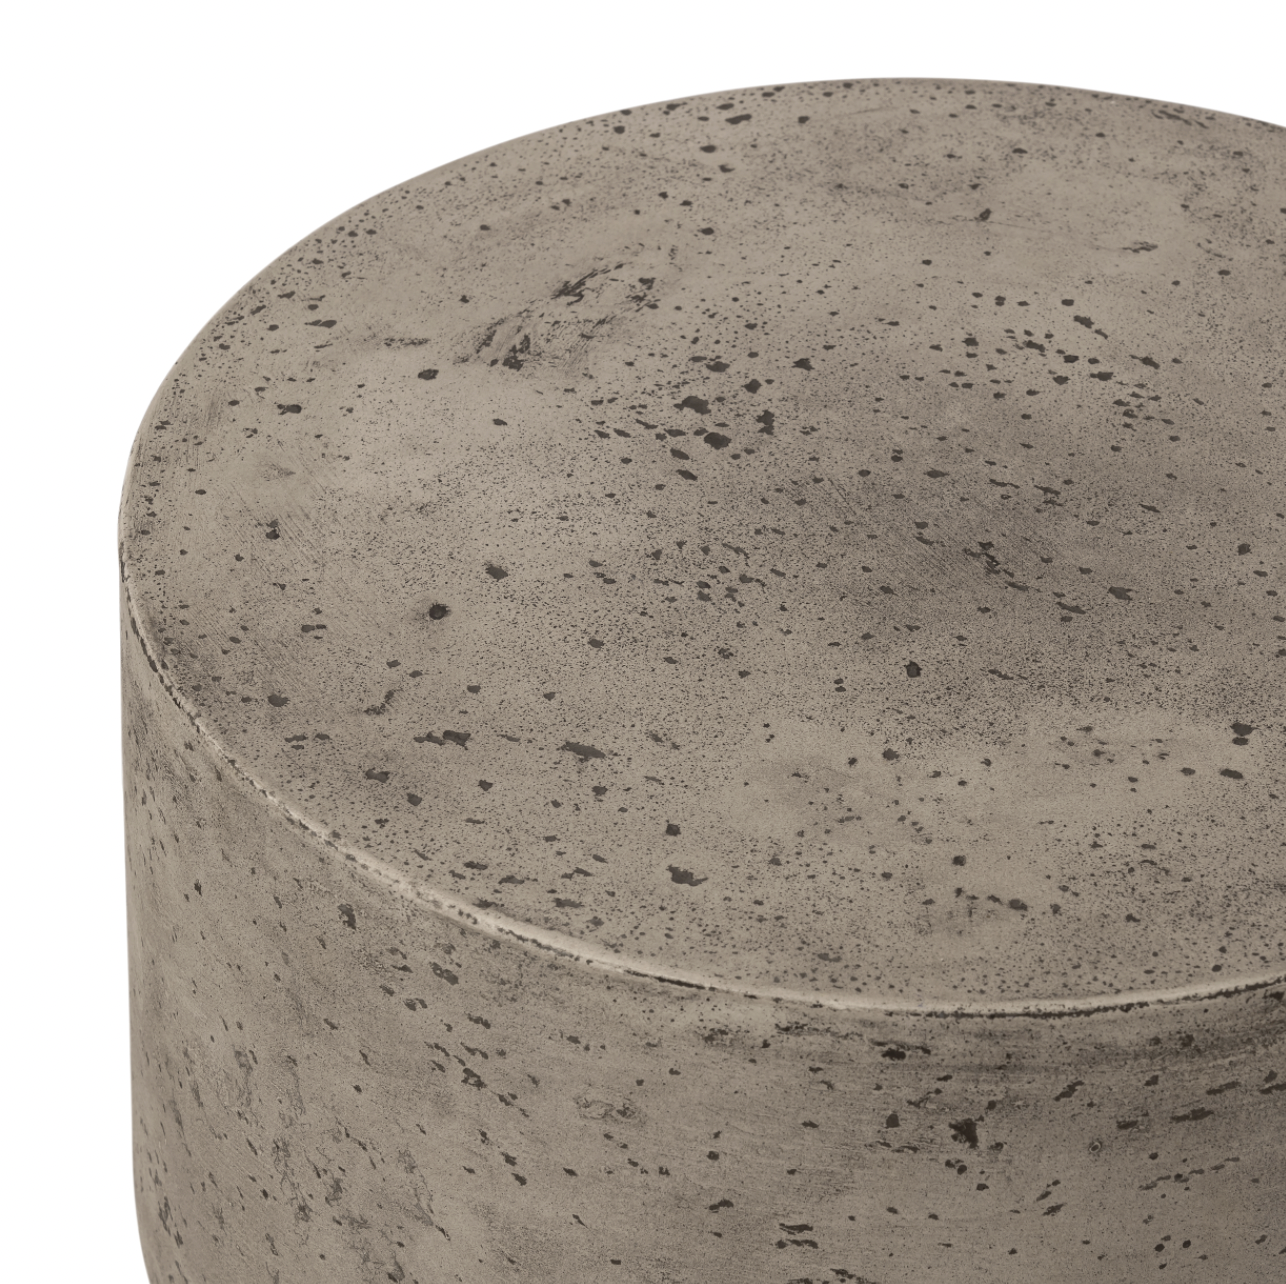 Made from solid concrete, this Nahla Outdoor End Table - Graphite is both sturdy and durable. Perfect for layering in as a sturdy extra surface, indoors or out. Distressing will vary slightly from piece to piece, given concrete's organic nature. Cover or store inside during inclement weather and when not in use.  Overall Dimensions: 15.75"w x 15.75"d x 17.75"h